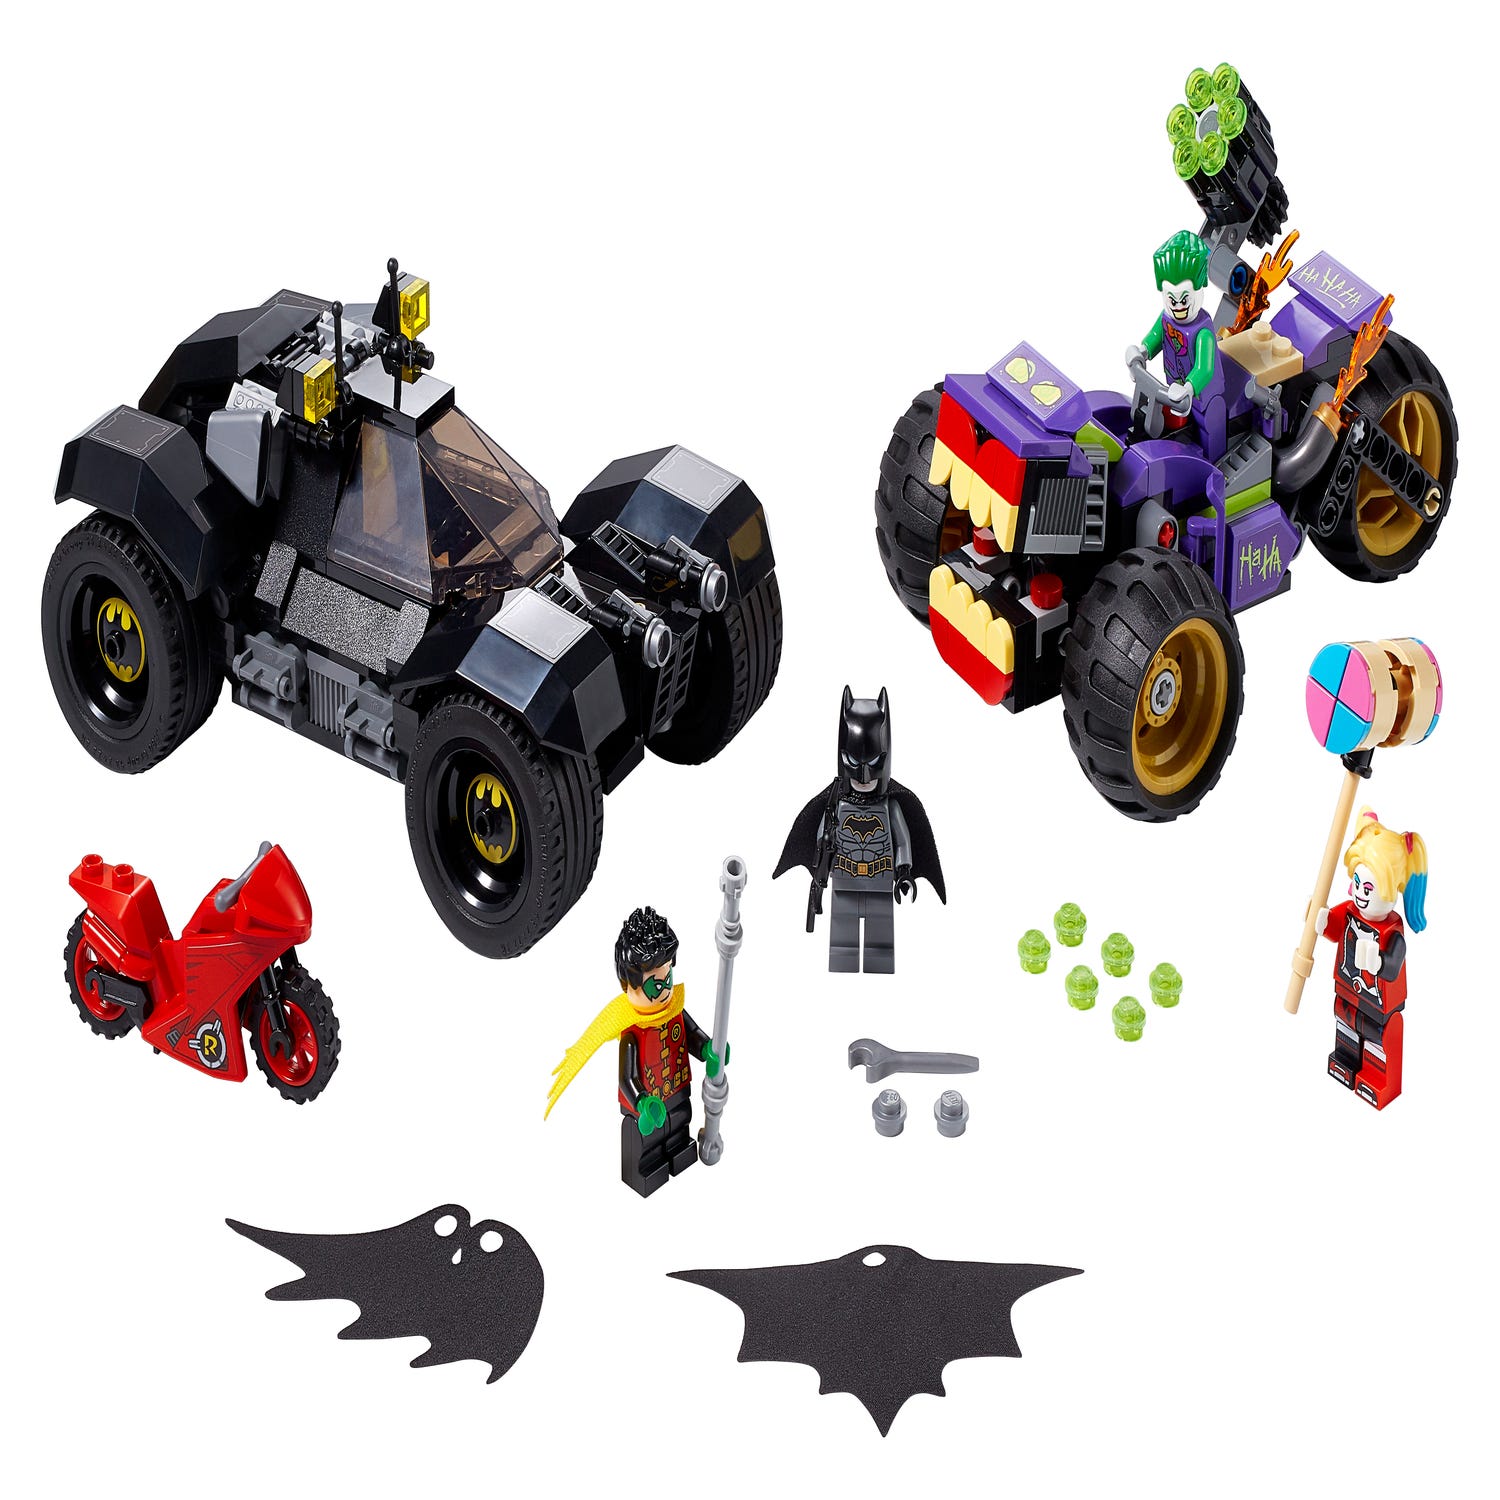 Joker's Trike Chase 76159 | DC | Buy online at the Official LEGO® Shop US